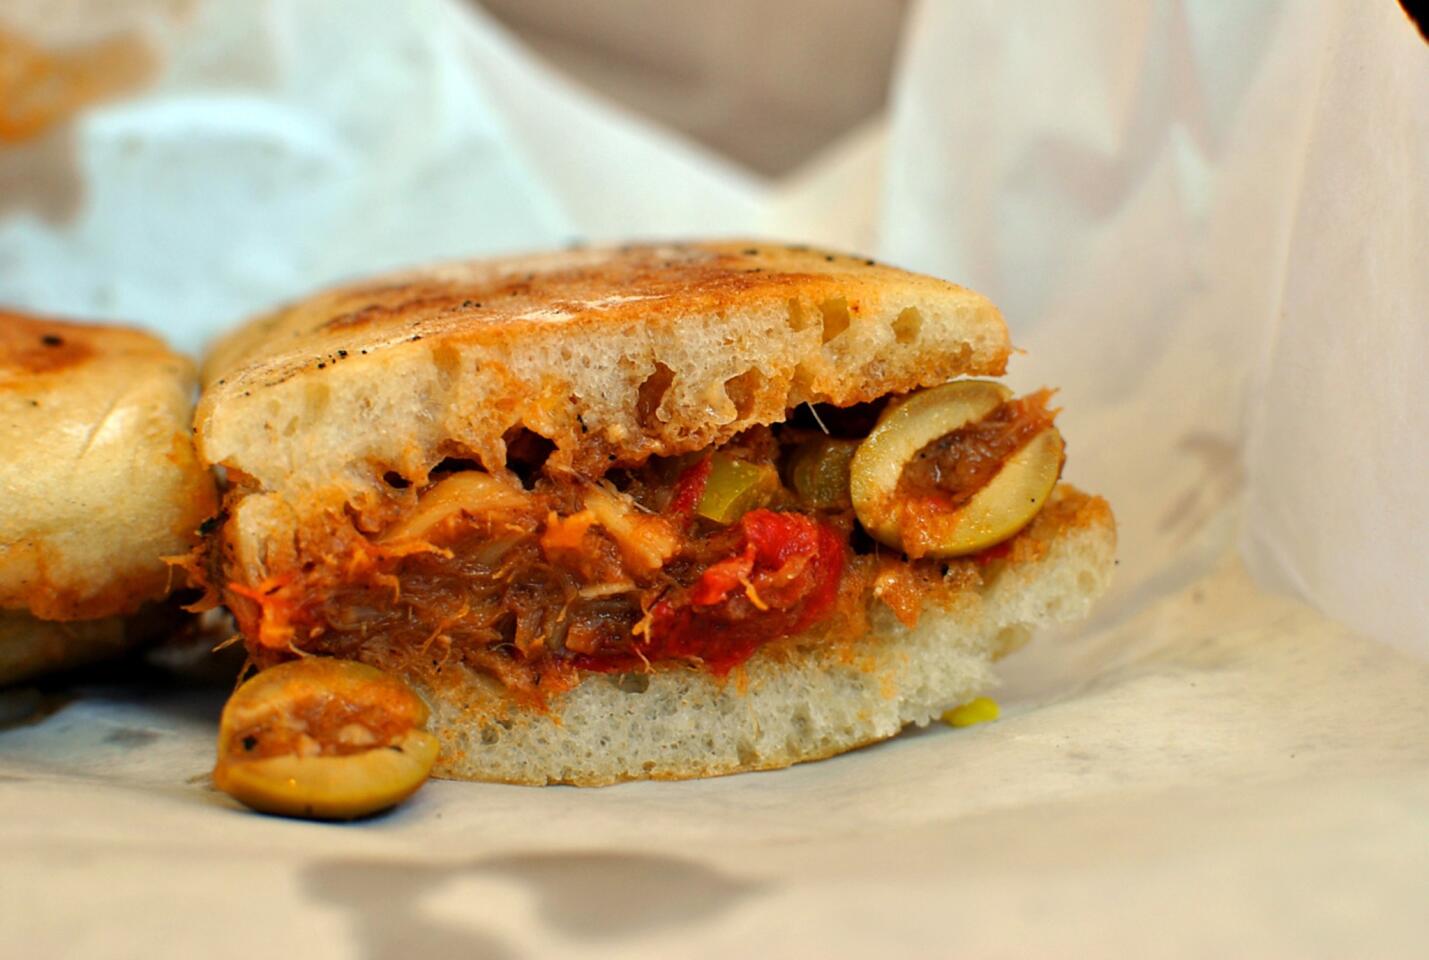 The torta de bacalao at Cook's Tortas in Monterey Park is stuffed with a Mexican-style salted cod guisado, seasoned with olives, red pepper and garlic. All of the restaurant's tortas are made with chewy, ciabatta-like handmade rolls baked fresh each morning.